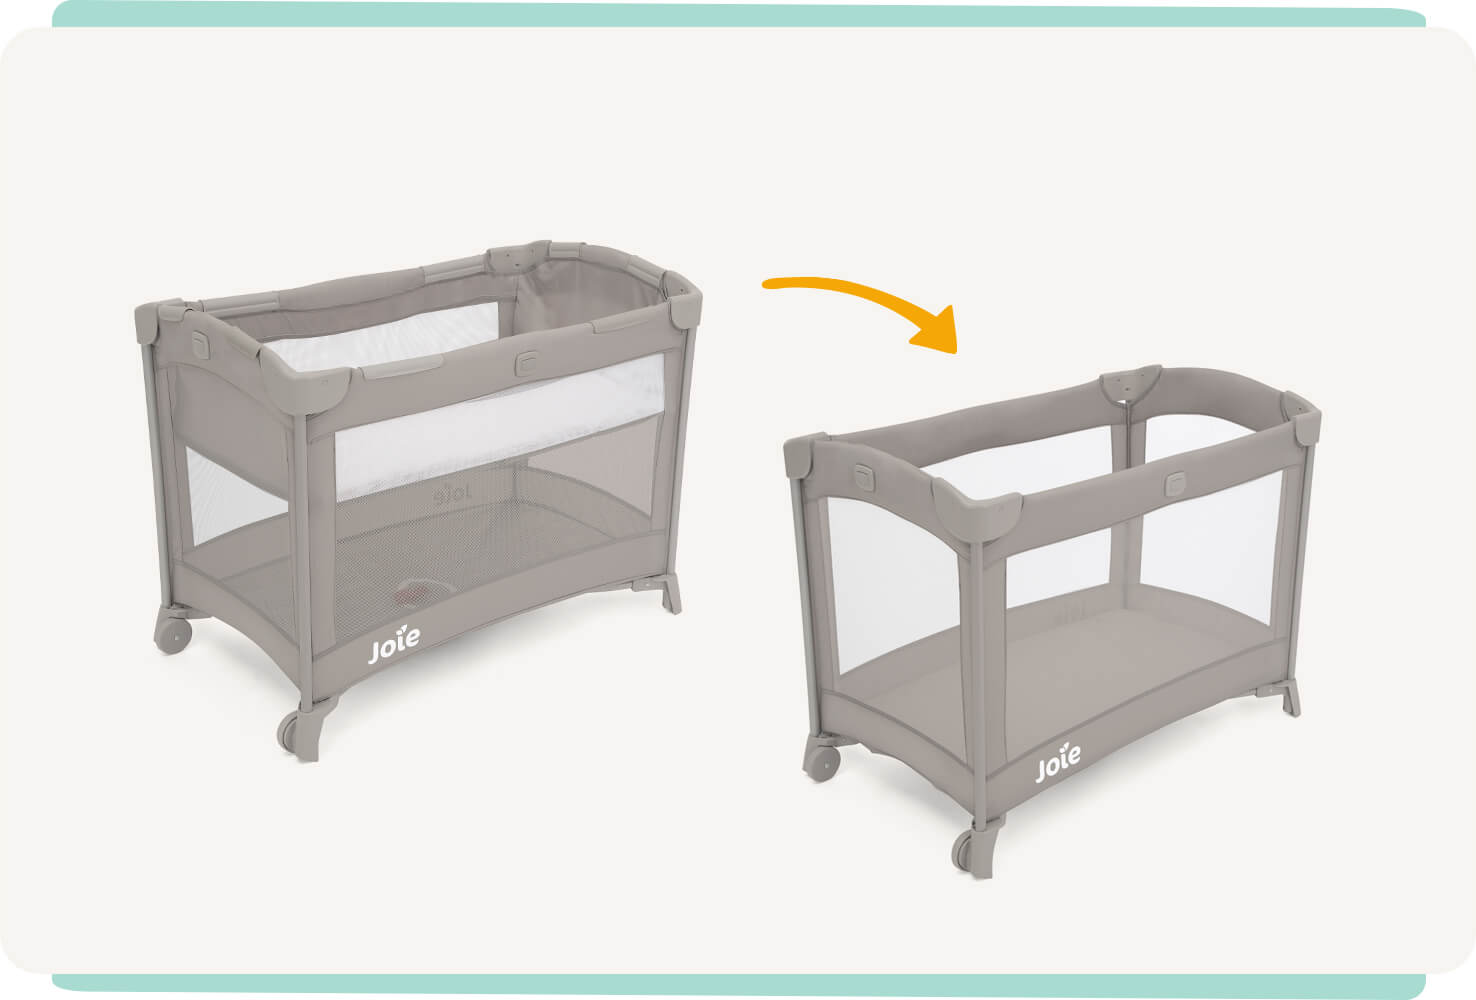 Two Joie Kubbie travel cots in tan, one with bassinet and one without.